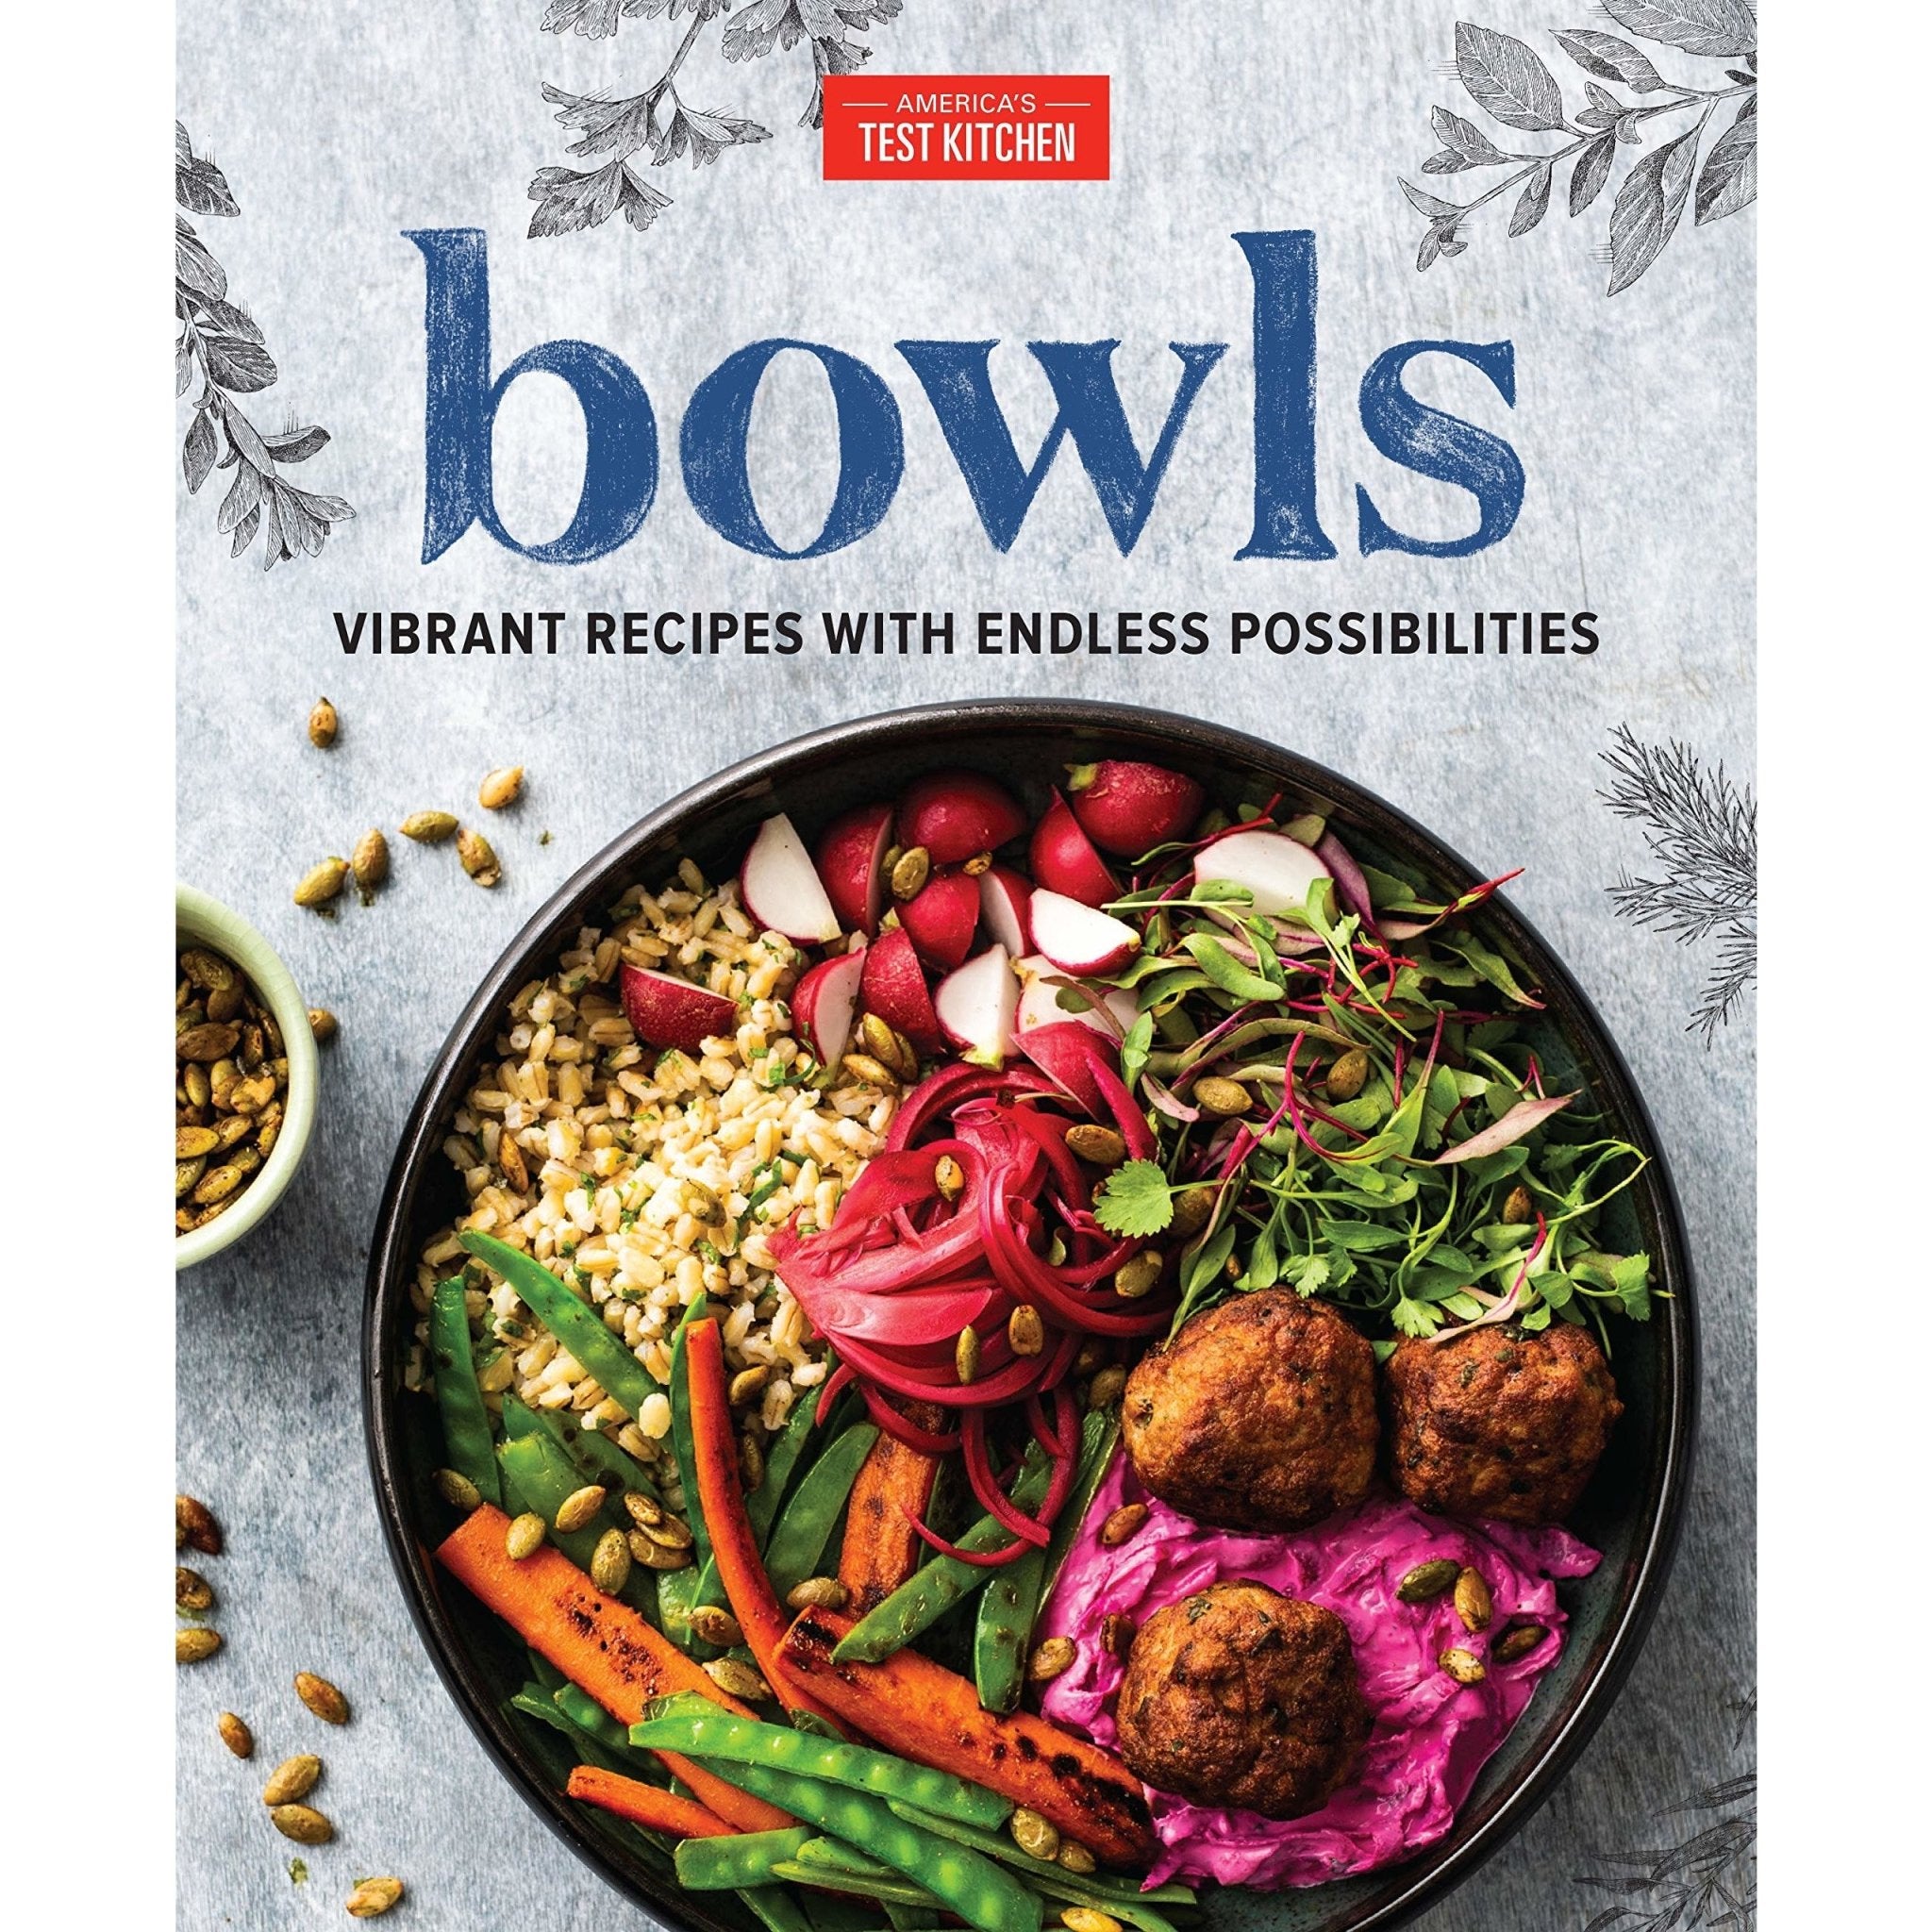 Bowls: Vibrant Recipes With Endless Possibilities - Hardcover Book